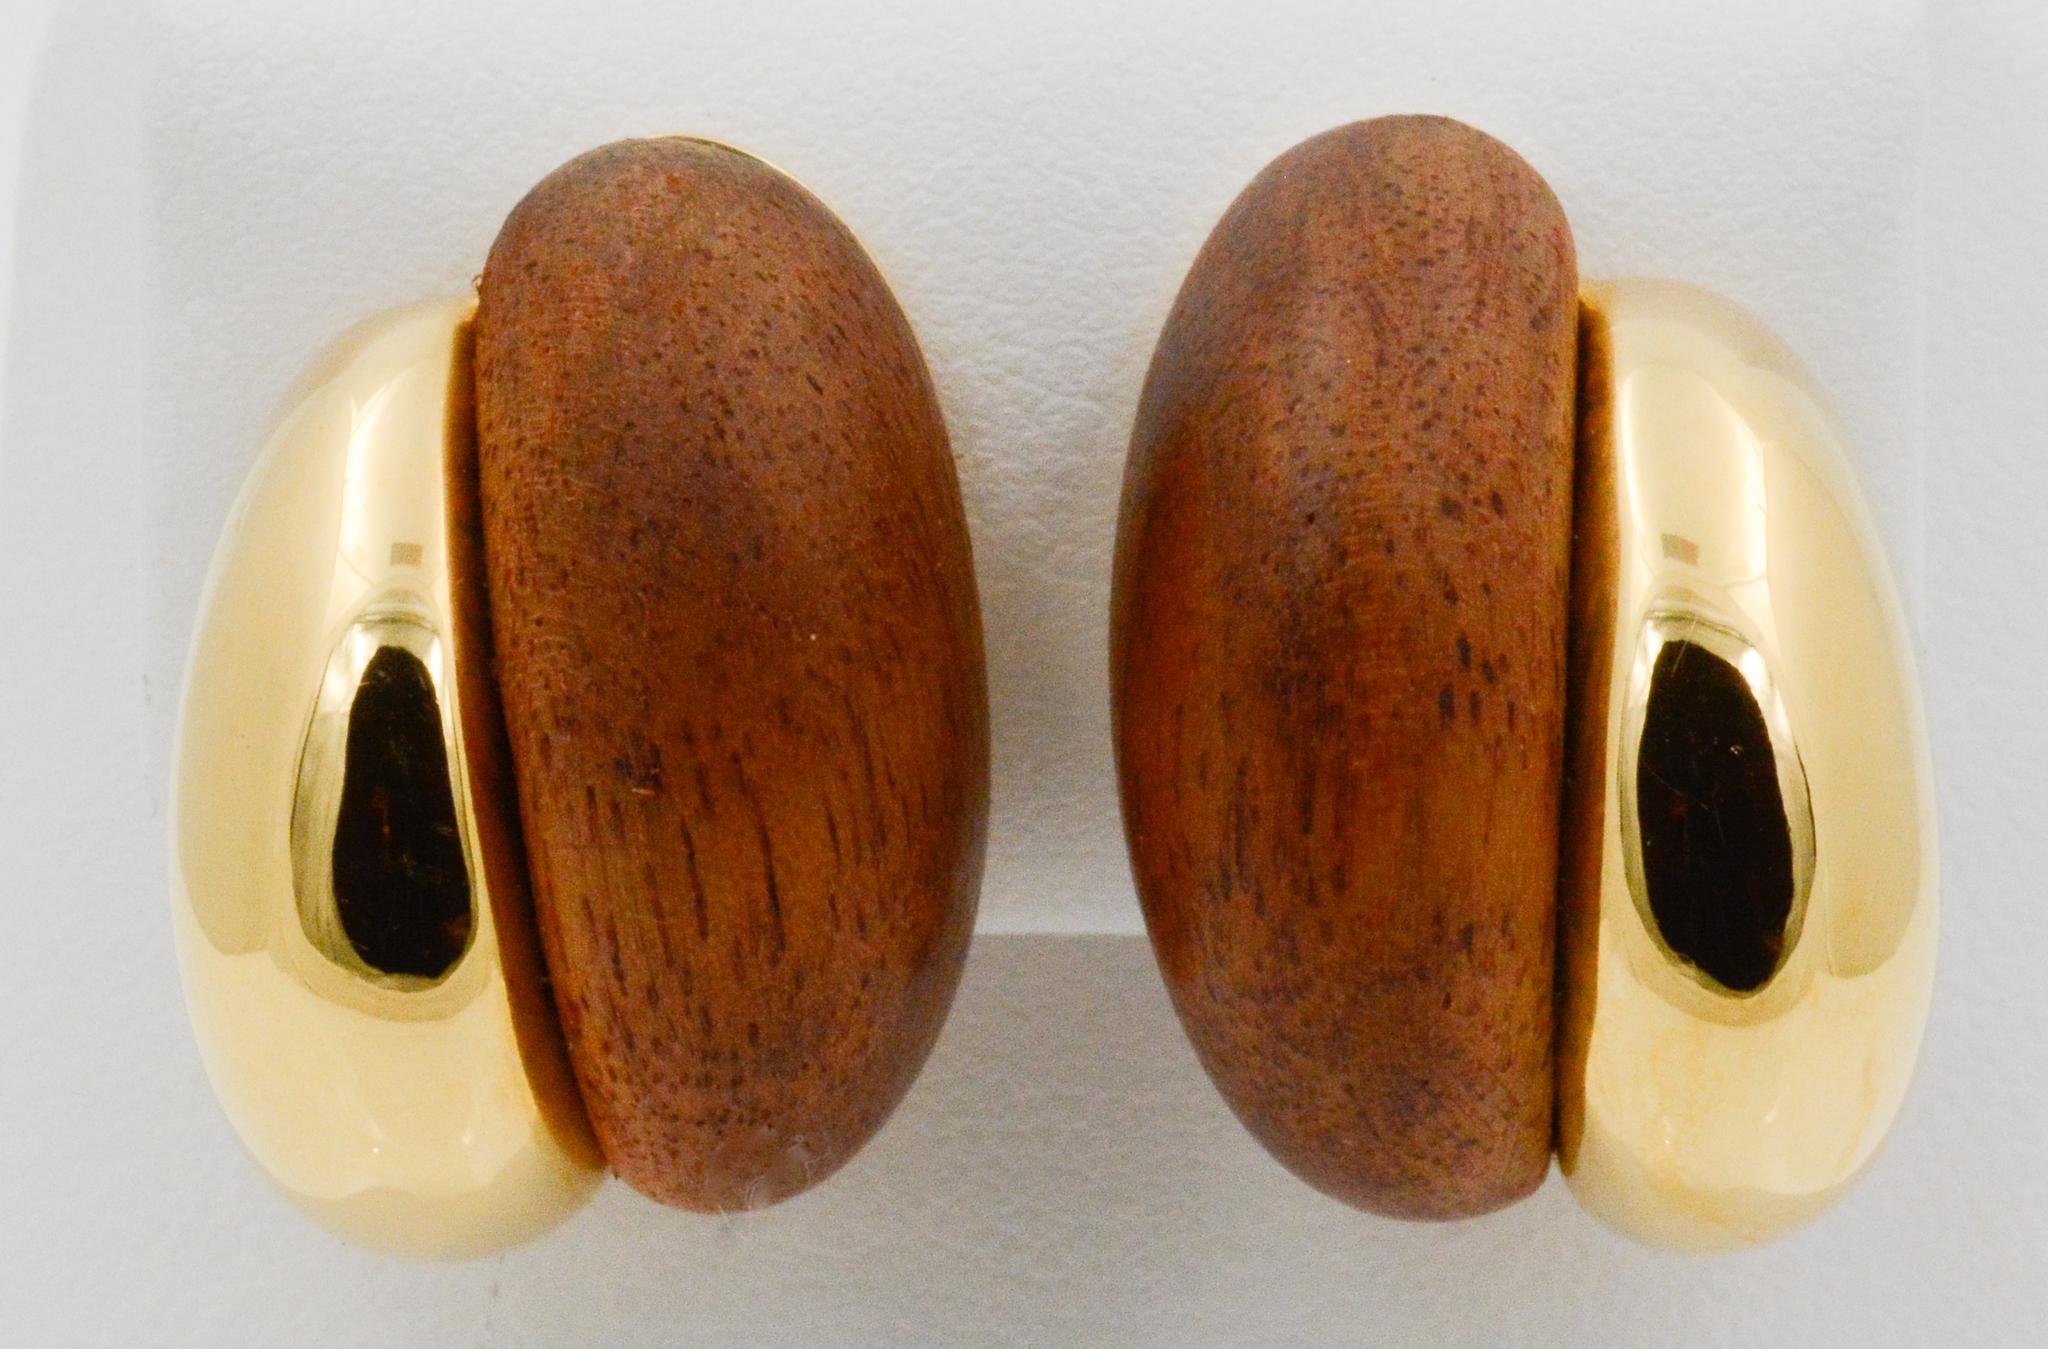 From Seaman Schepps, these Silhouette earrings feature a half 18 karat yellow gold and half walnut wood design with clip back. Signed Seaman Shepps. 